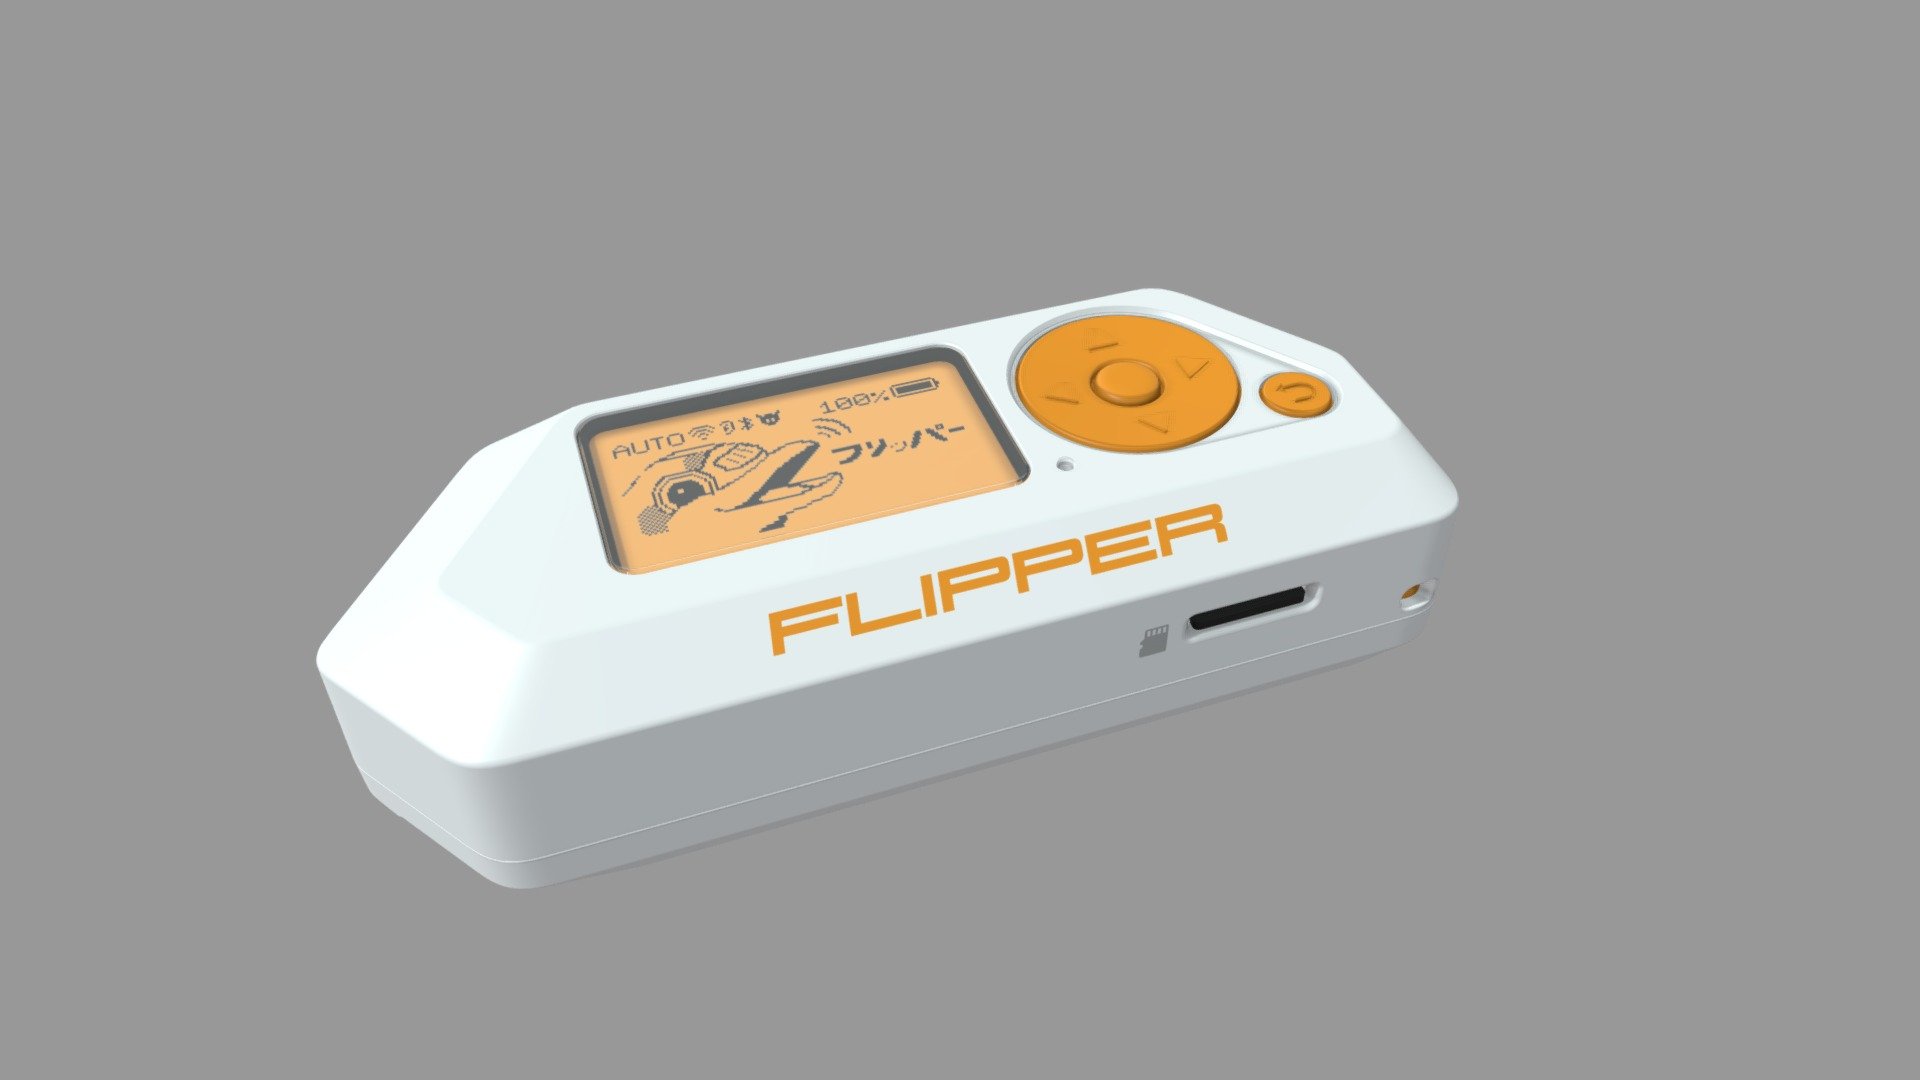 Flipper Zero is a portable multi-tool for pentesters and geeks in Tamagotchi body. It loves to hack digital stuff around such as radio protocols, access control systems, hardware and more. It's fully opensource and customizable so you can extend it in whatever way you like. Homepage: https://flipperzero.one/ - Flipper Zero - 3D model by Pavel Zhovner (@zhovner) 3d model